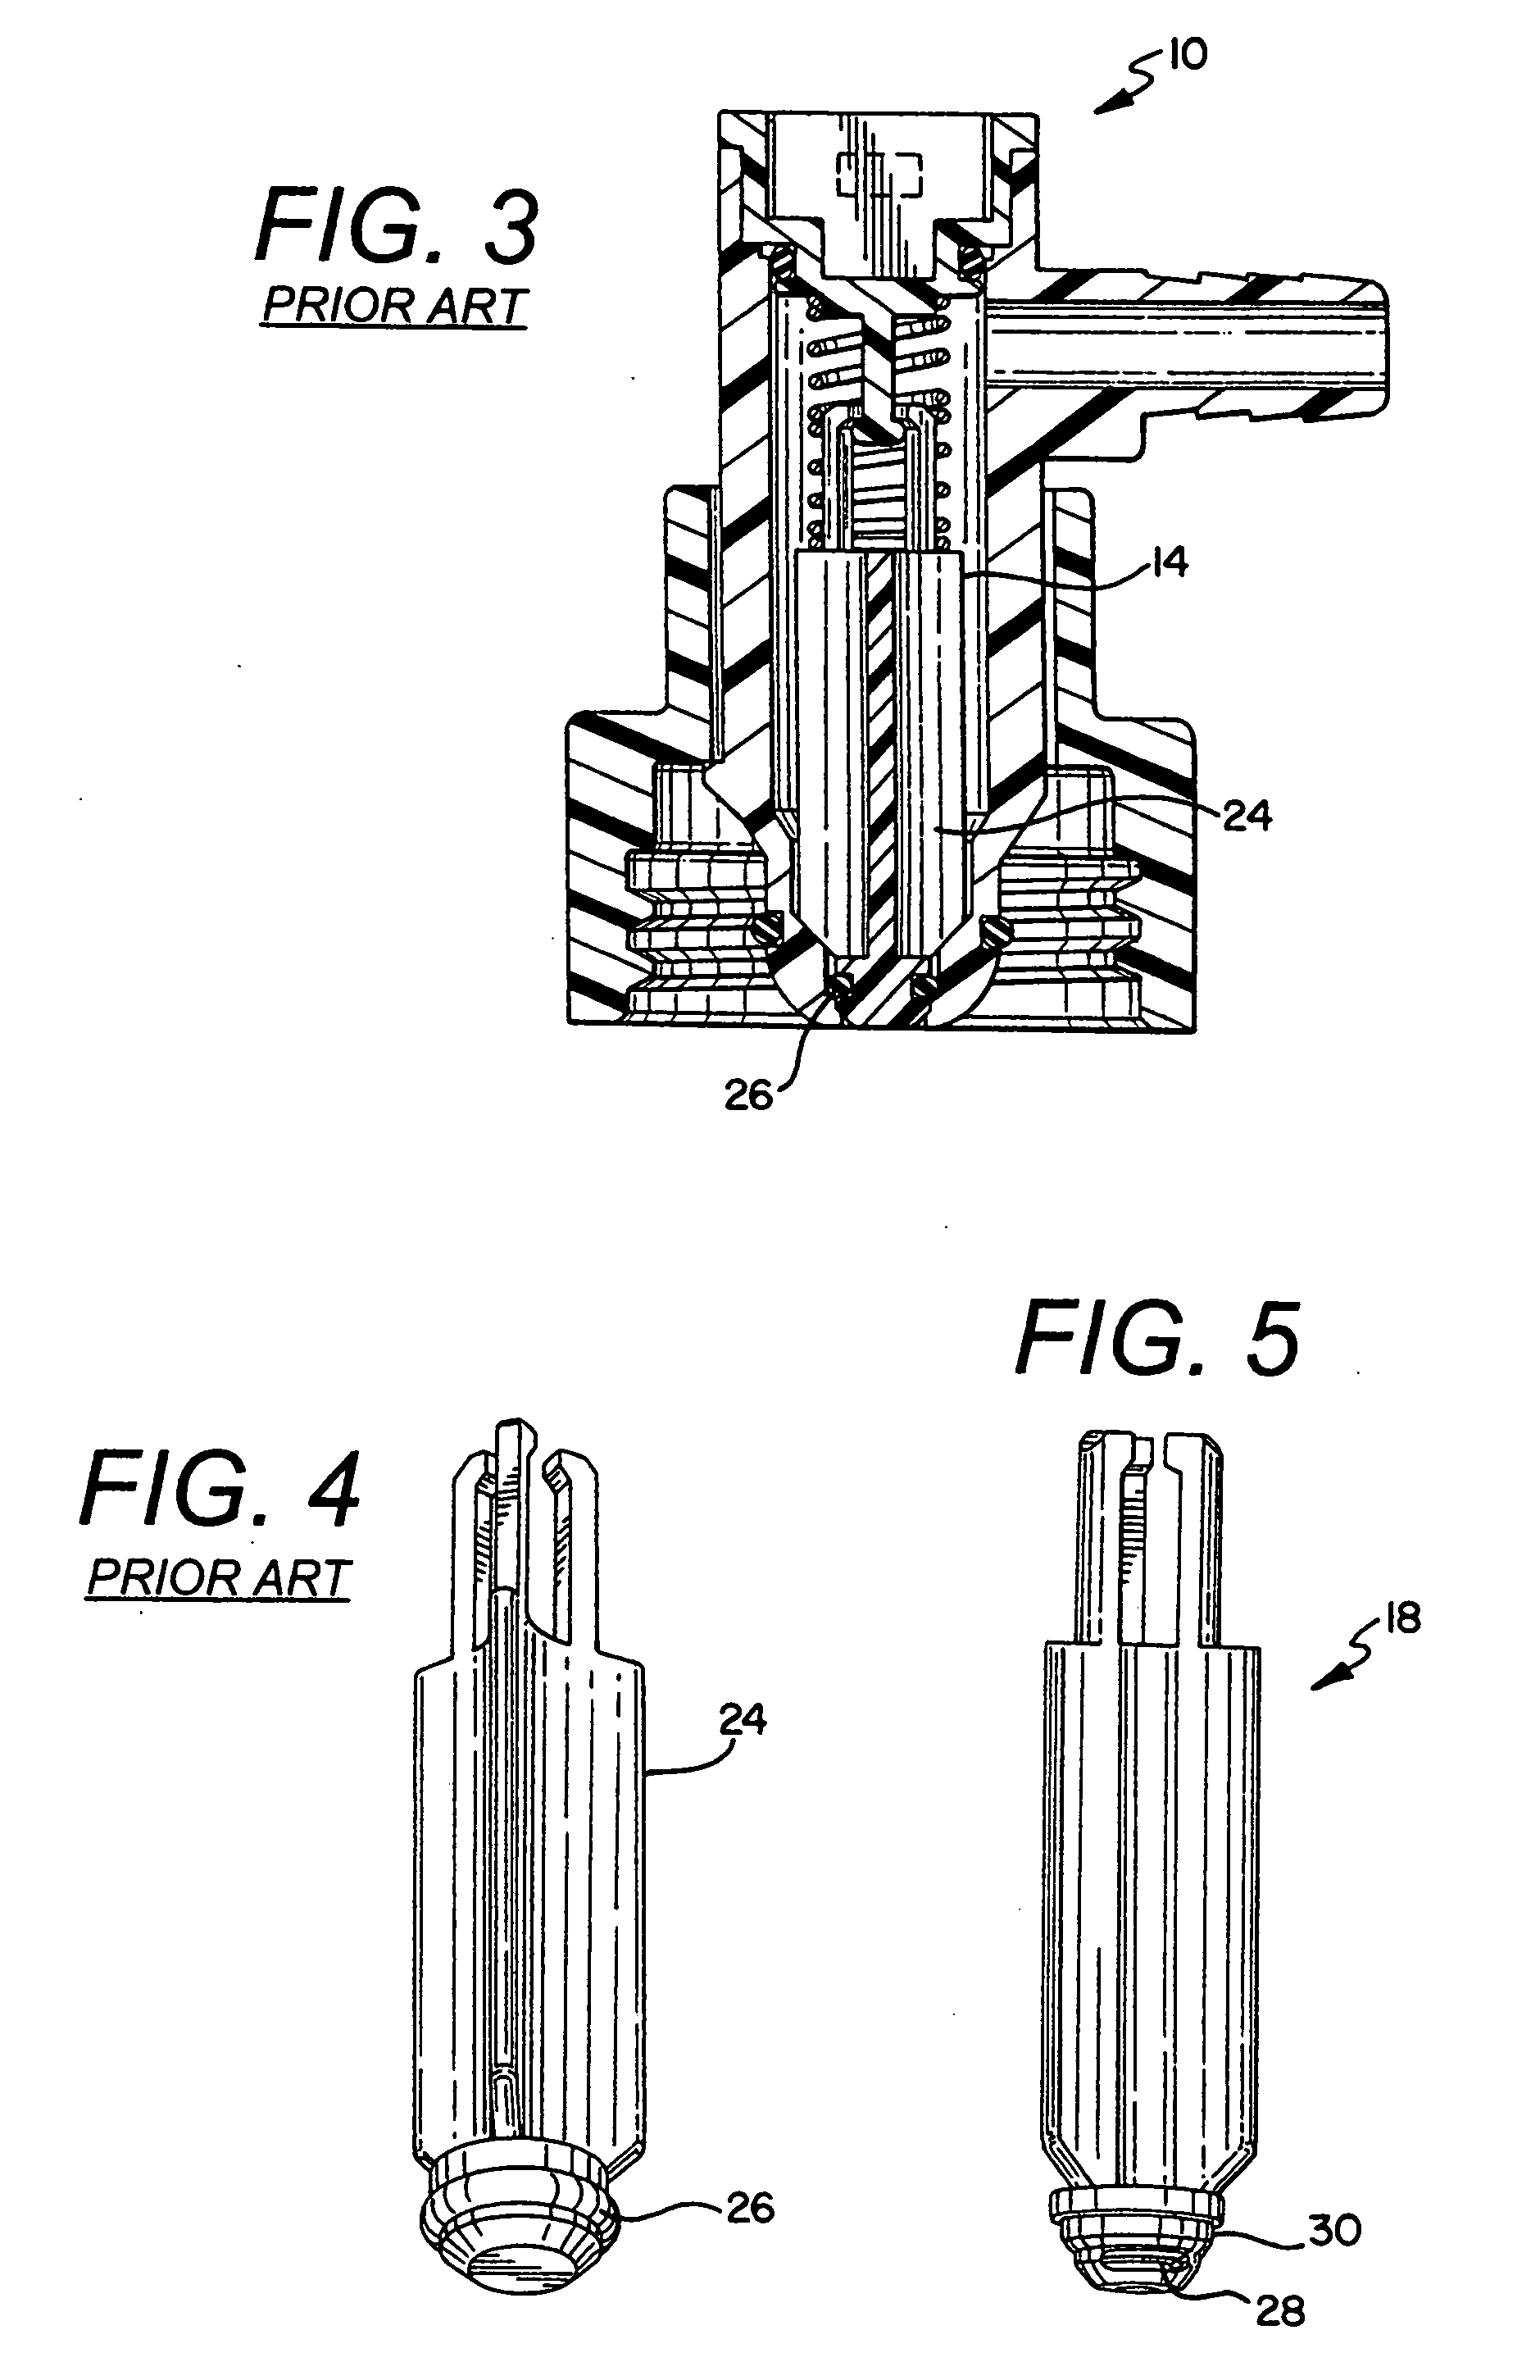 Valve for a fluid flow connector having an overmolded plunger